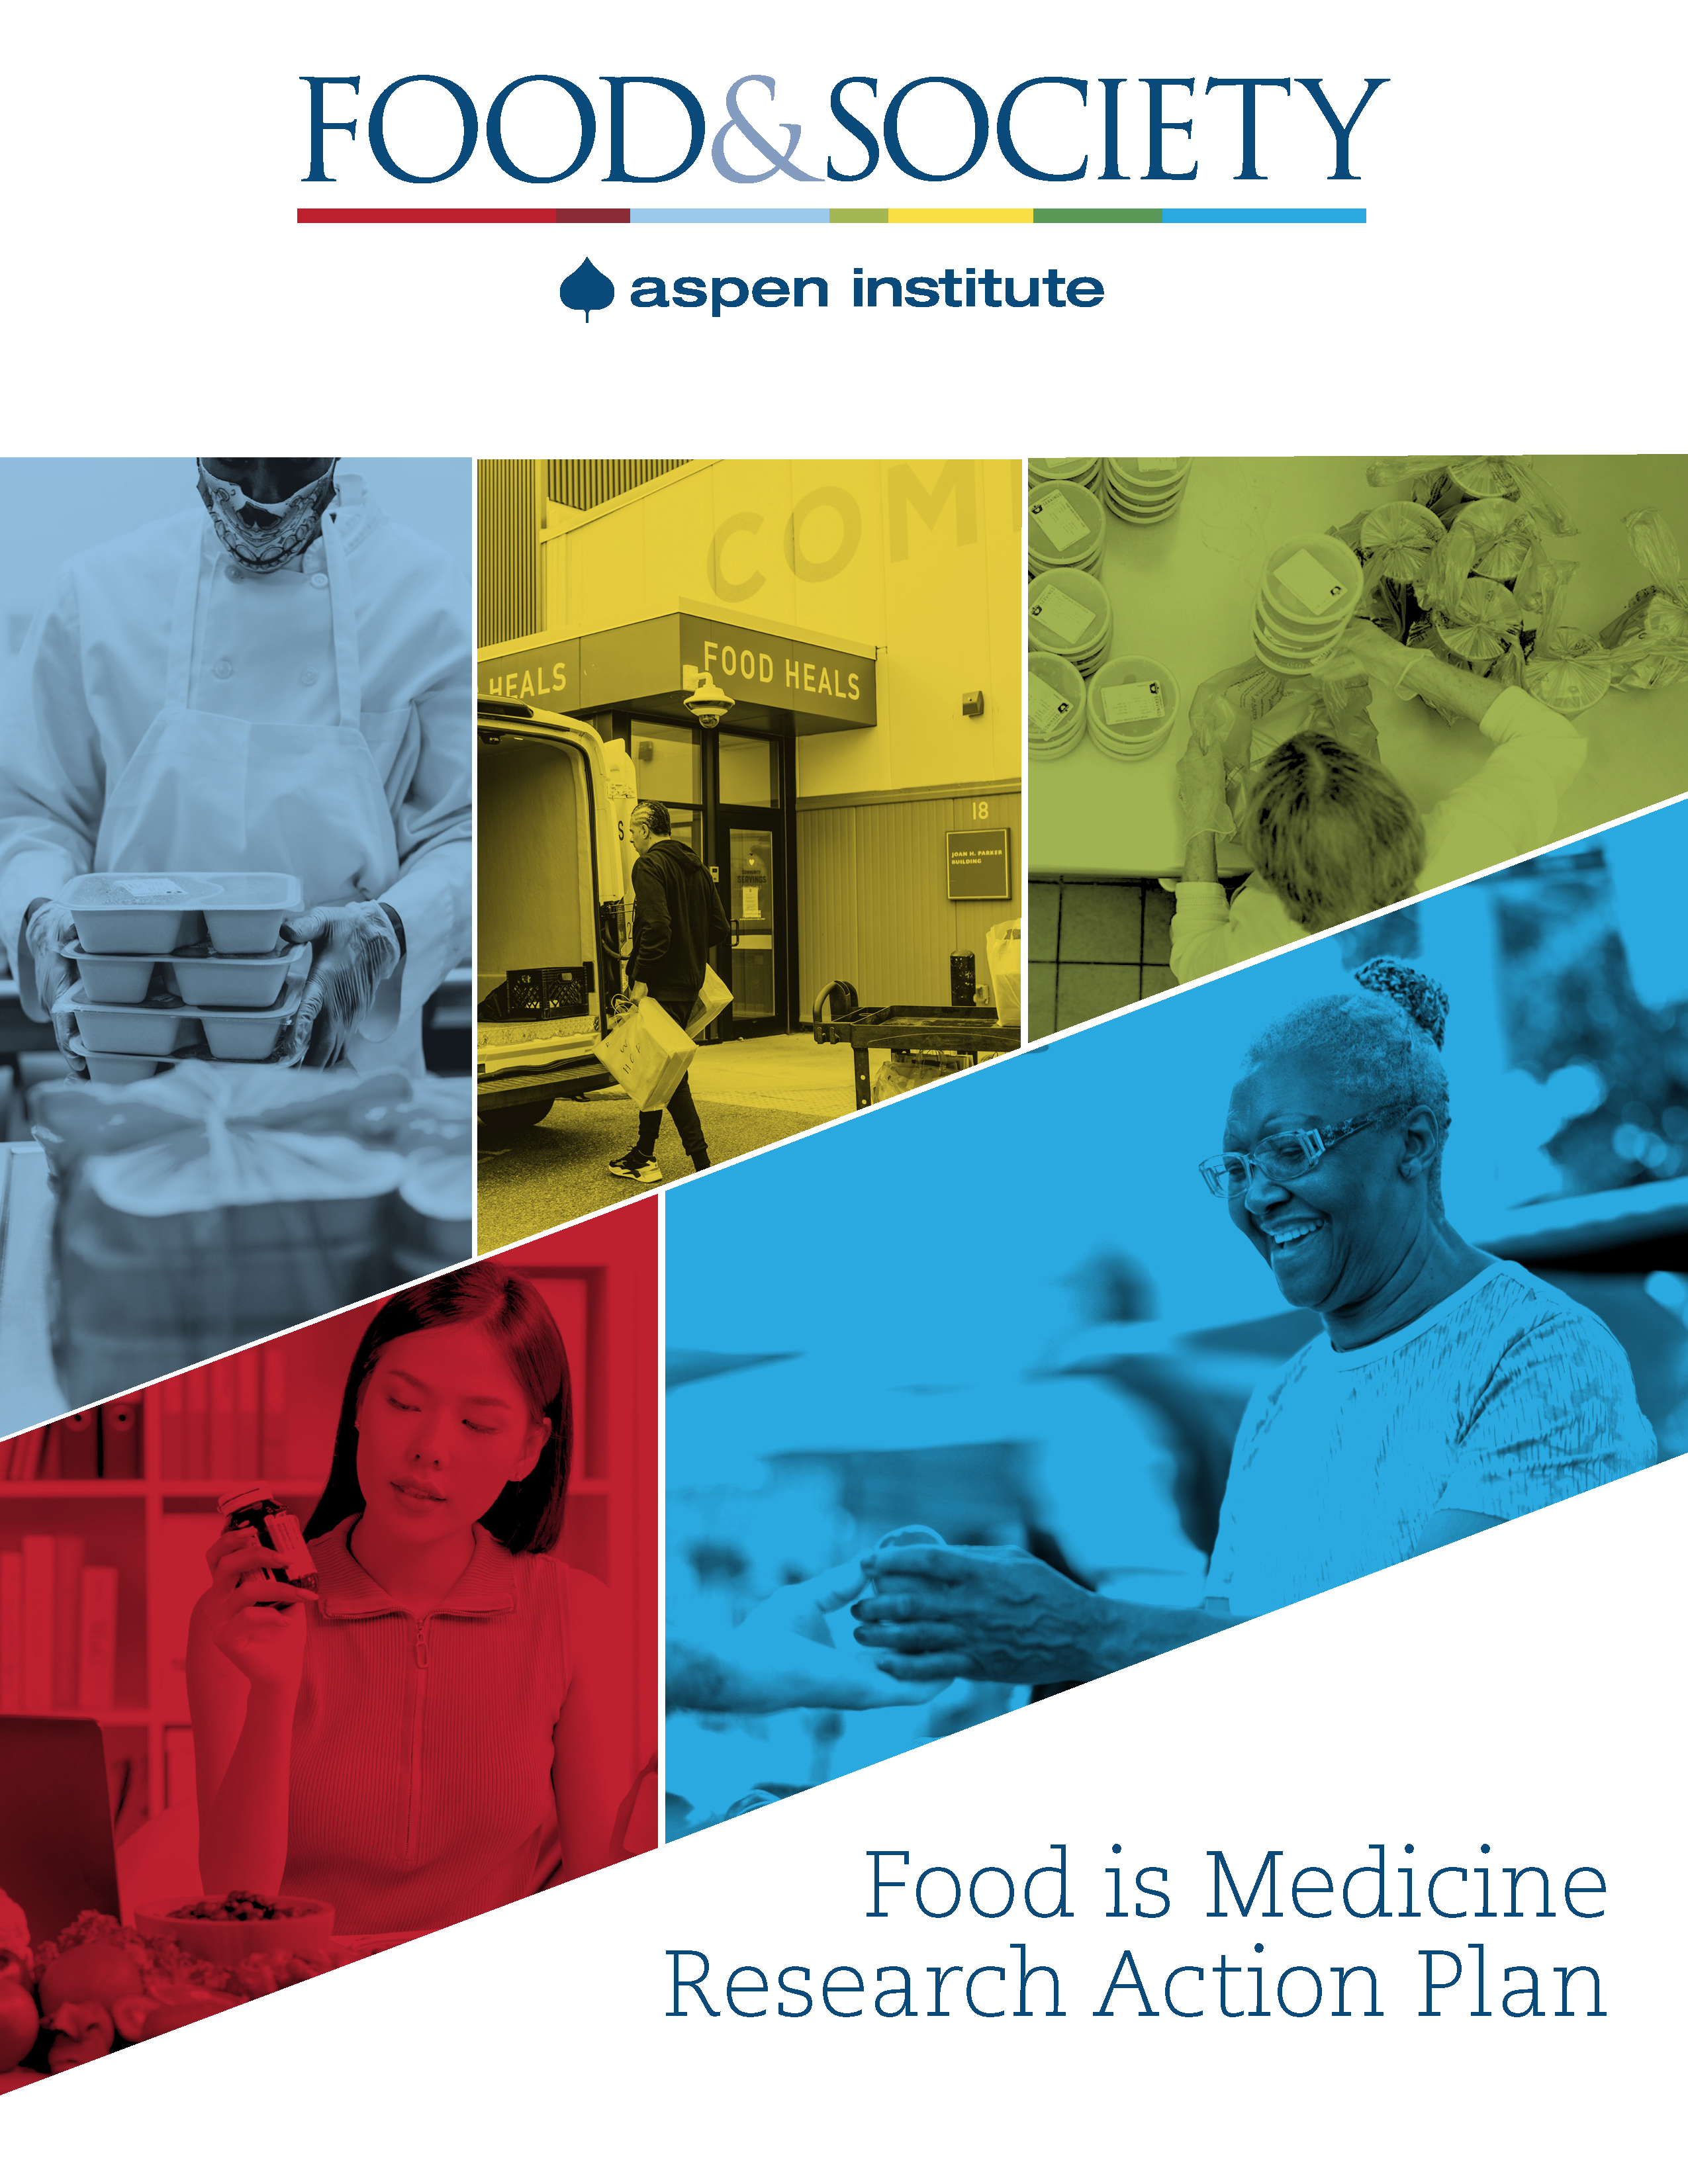 Aspen Institute Food is Medicine Research Action Plan